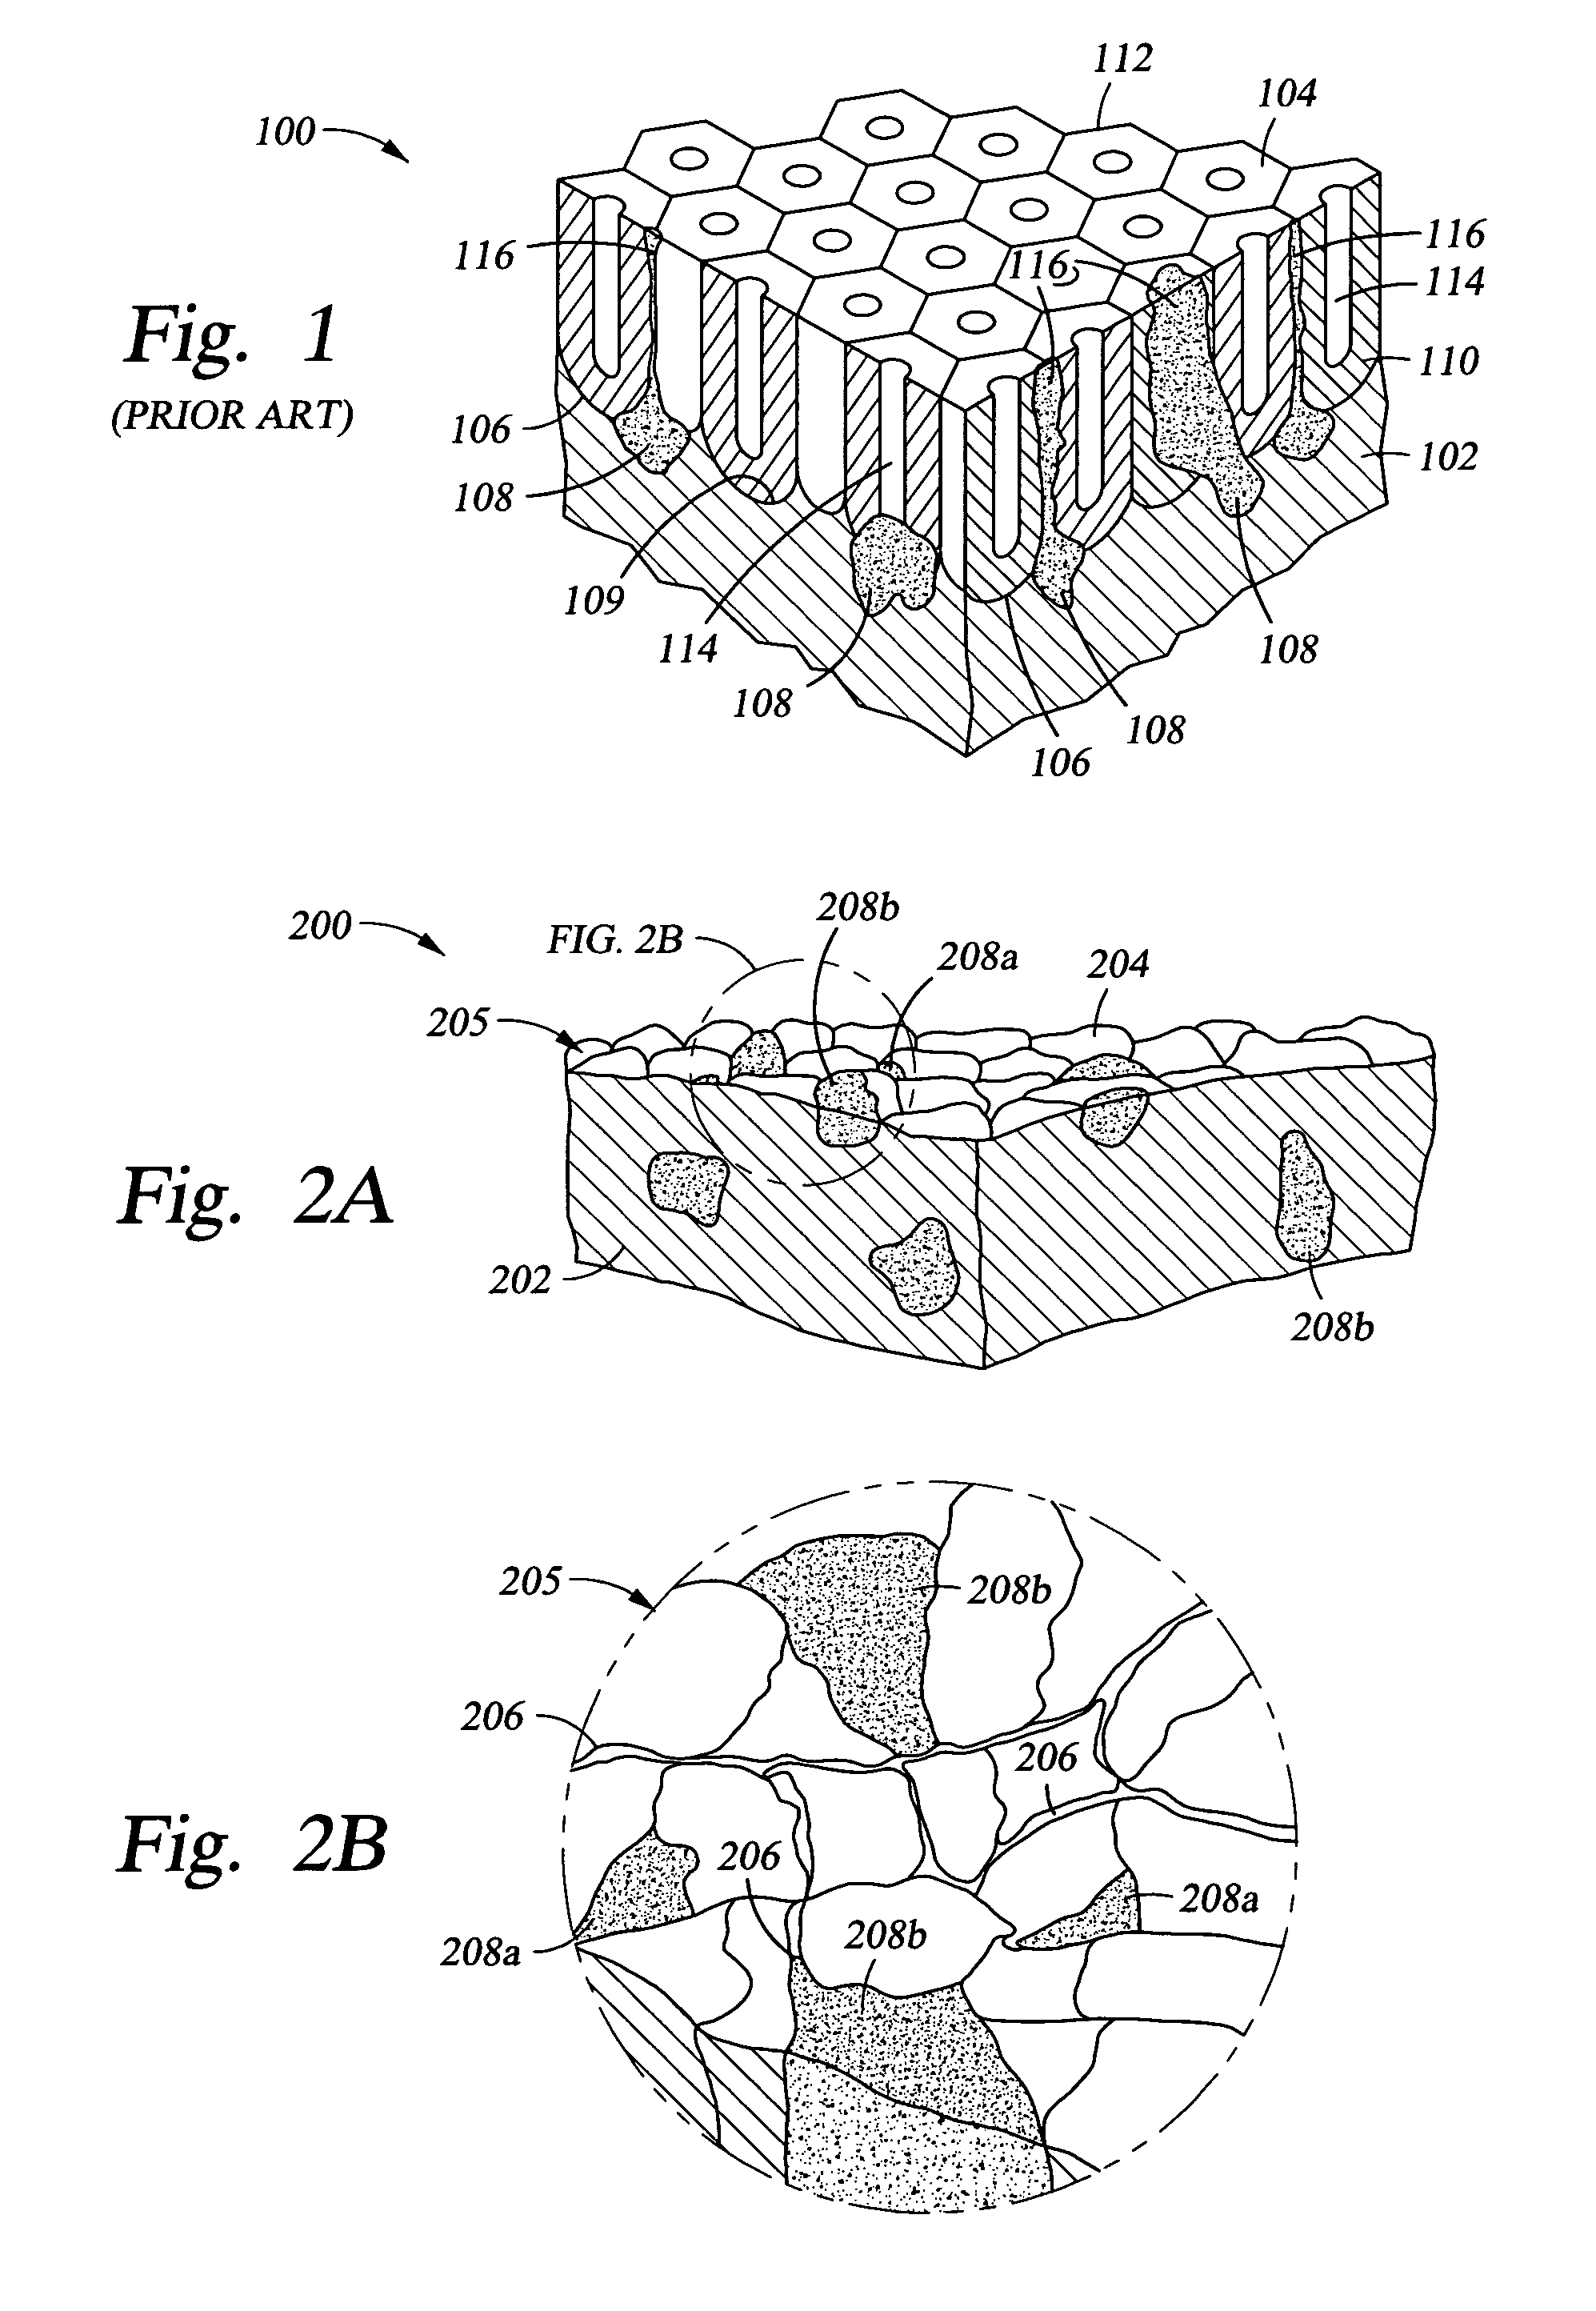 Halogen-resistant, anodized aluminum for use in semiconductor processing apparatus